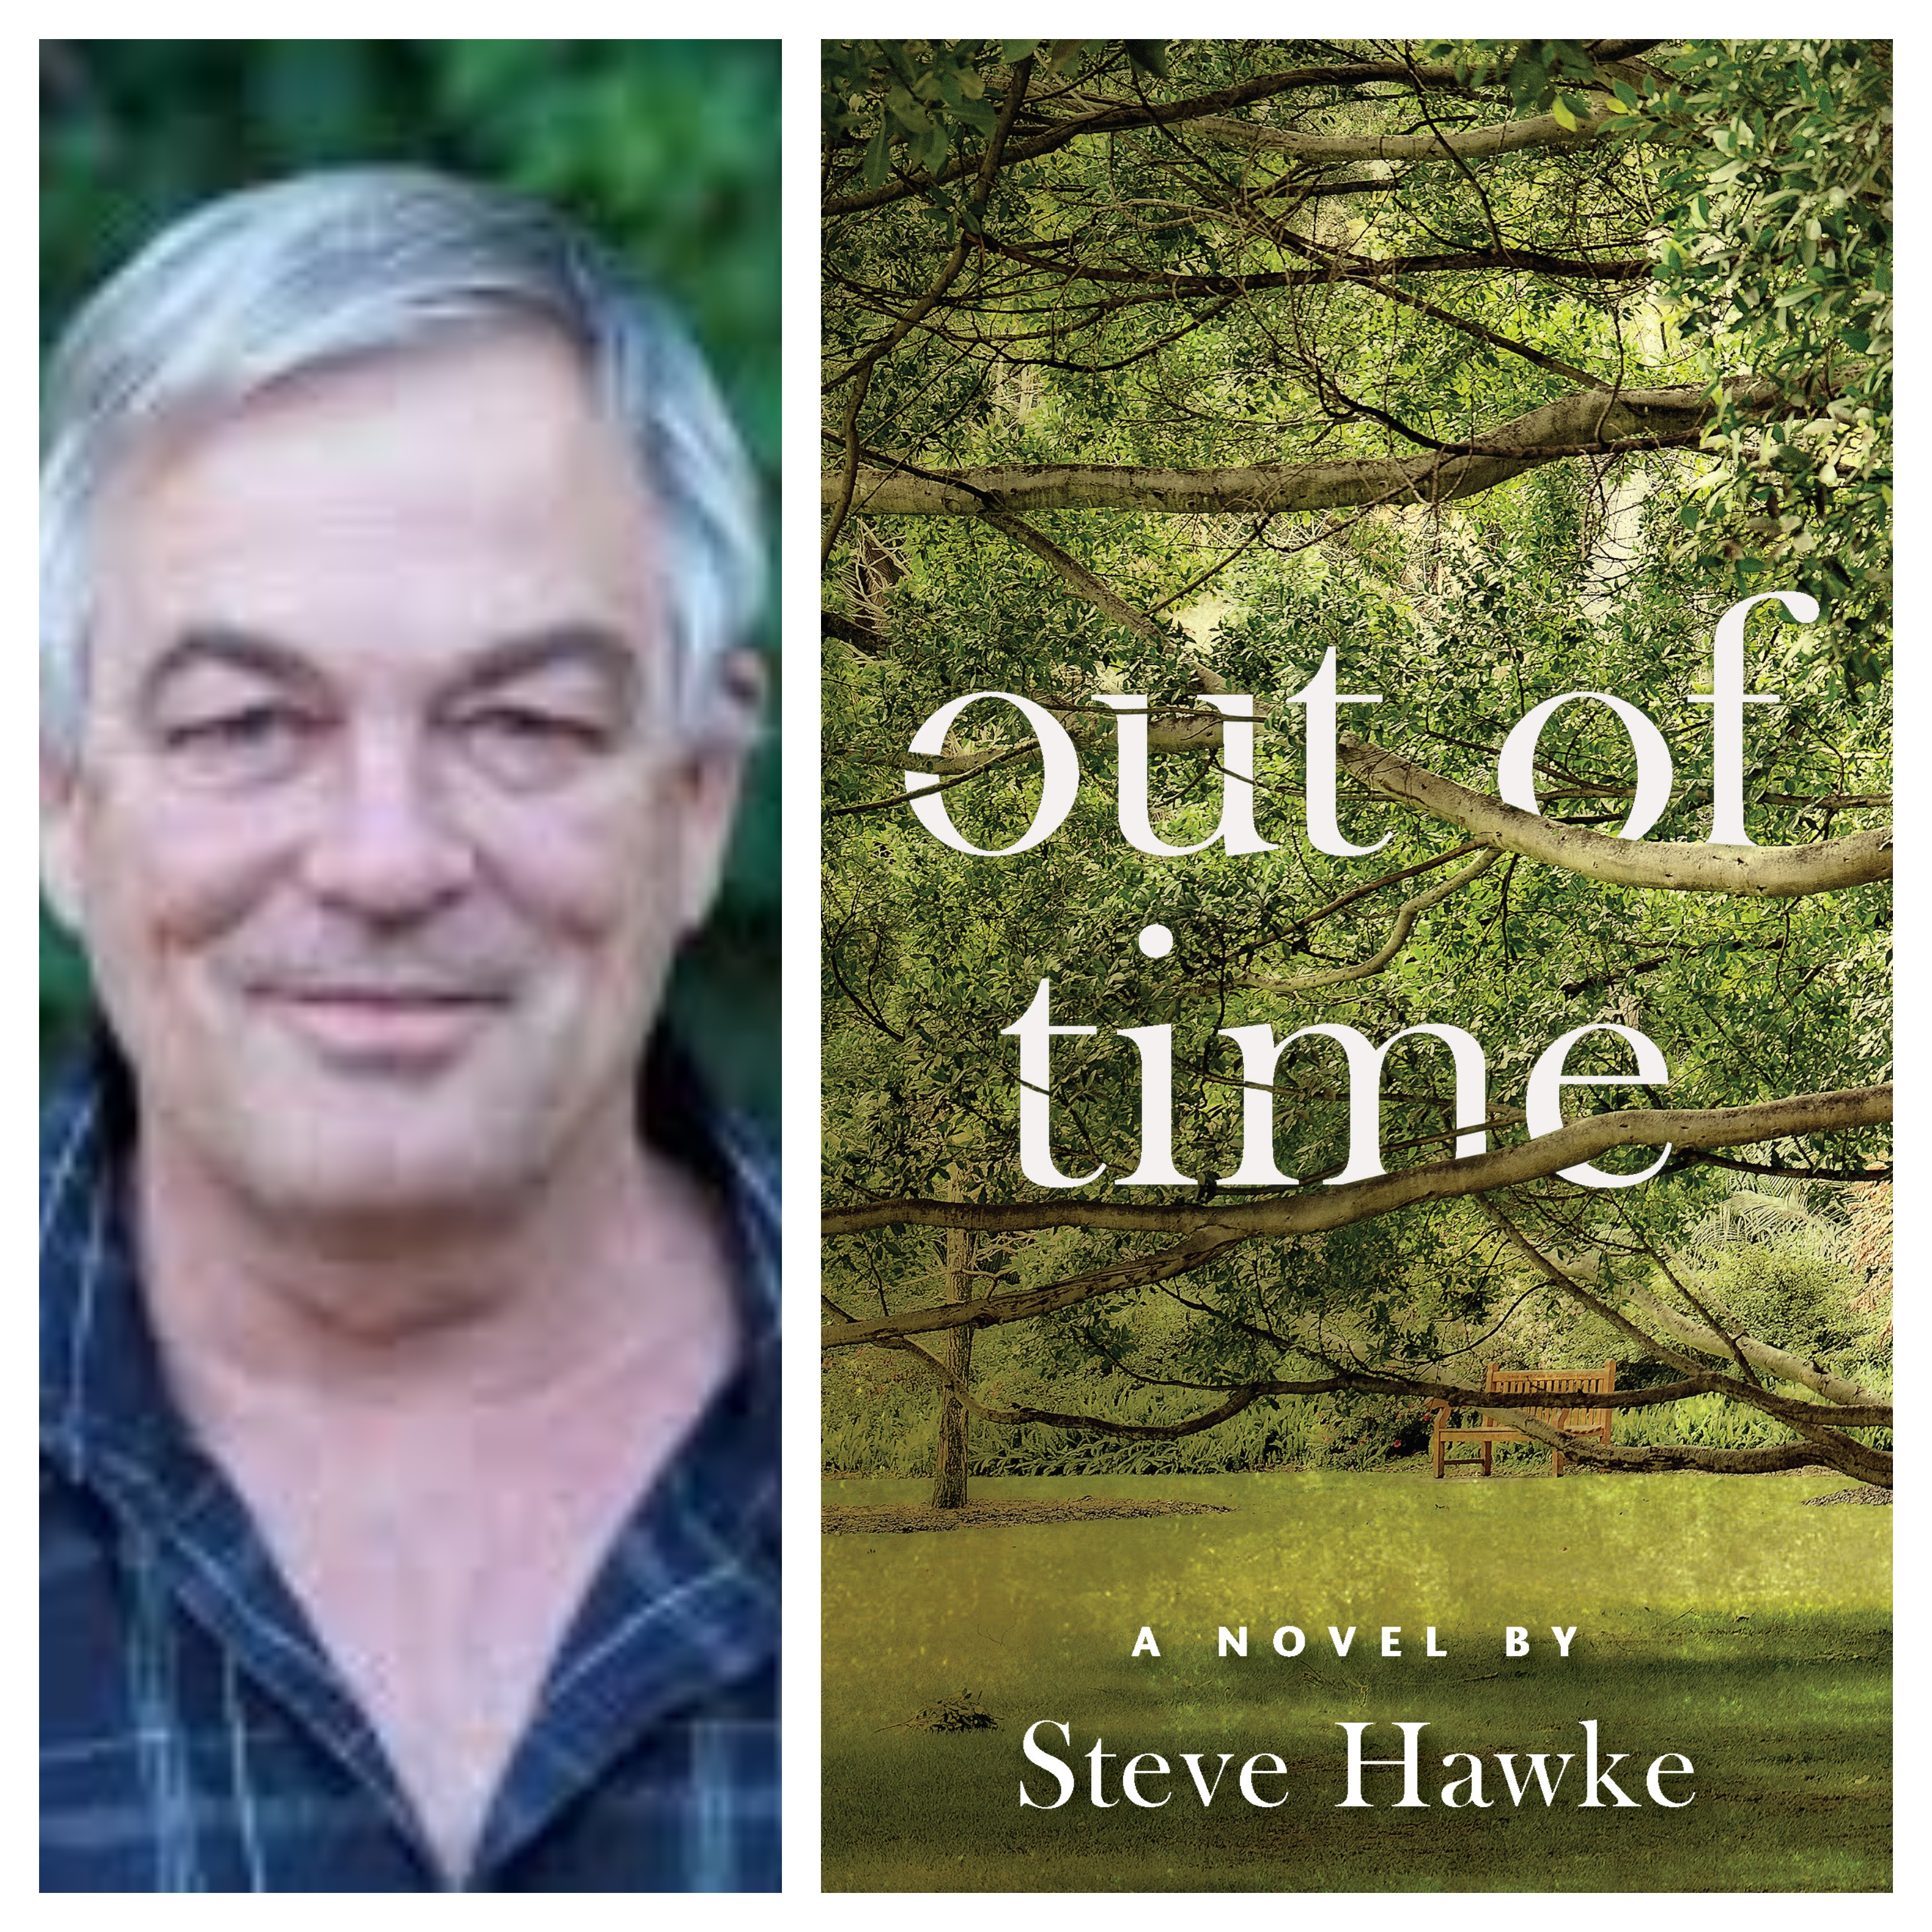 Steve Hawke on his new book: Out Of Time.